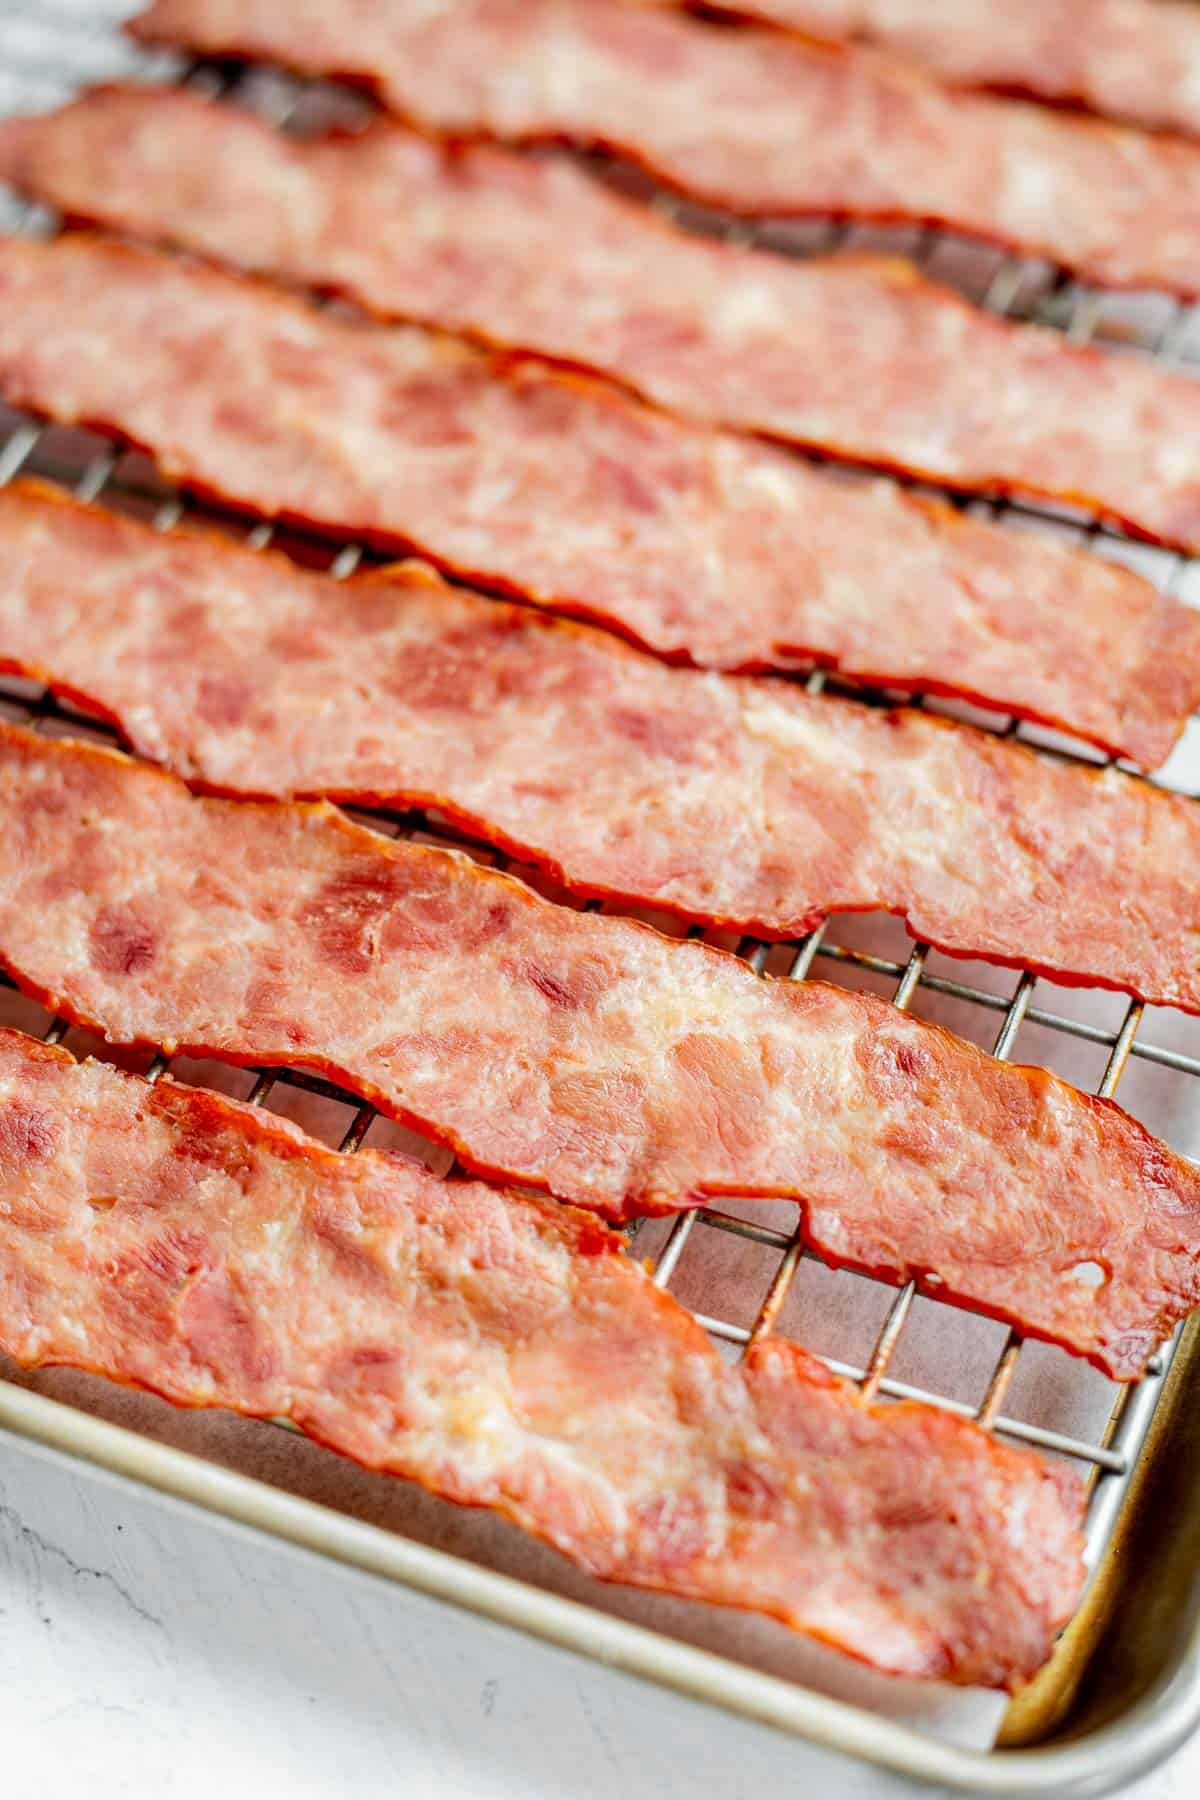 slices of oven baked turkey bacon on a wire rack.